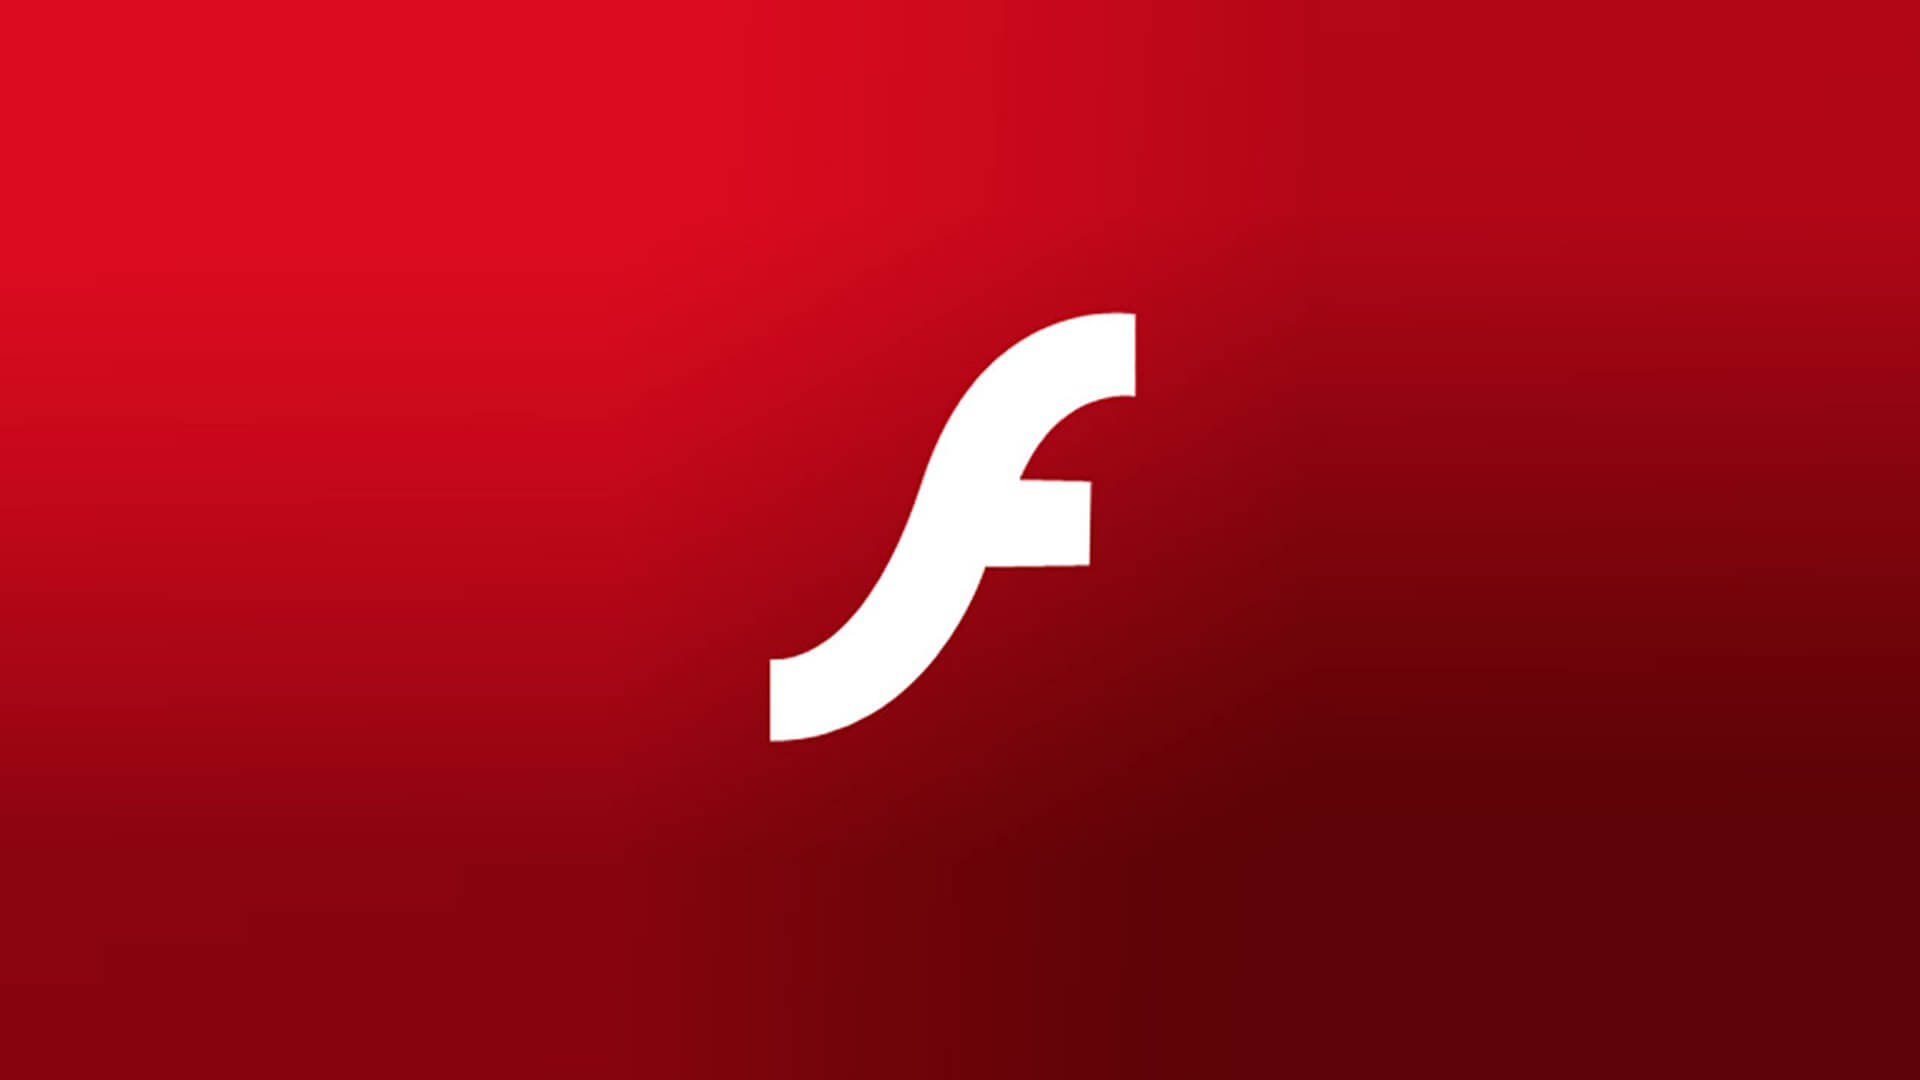 Windows 10 Adobe Flash Player Disabled On Some Builds | Donklephant